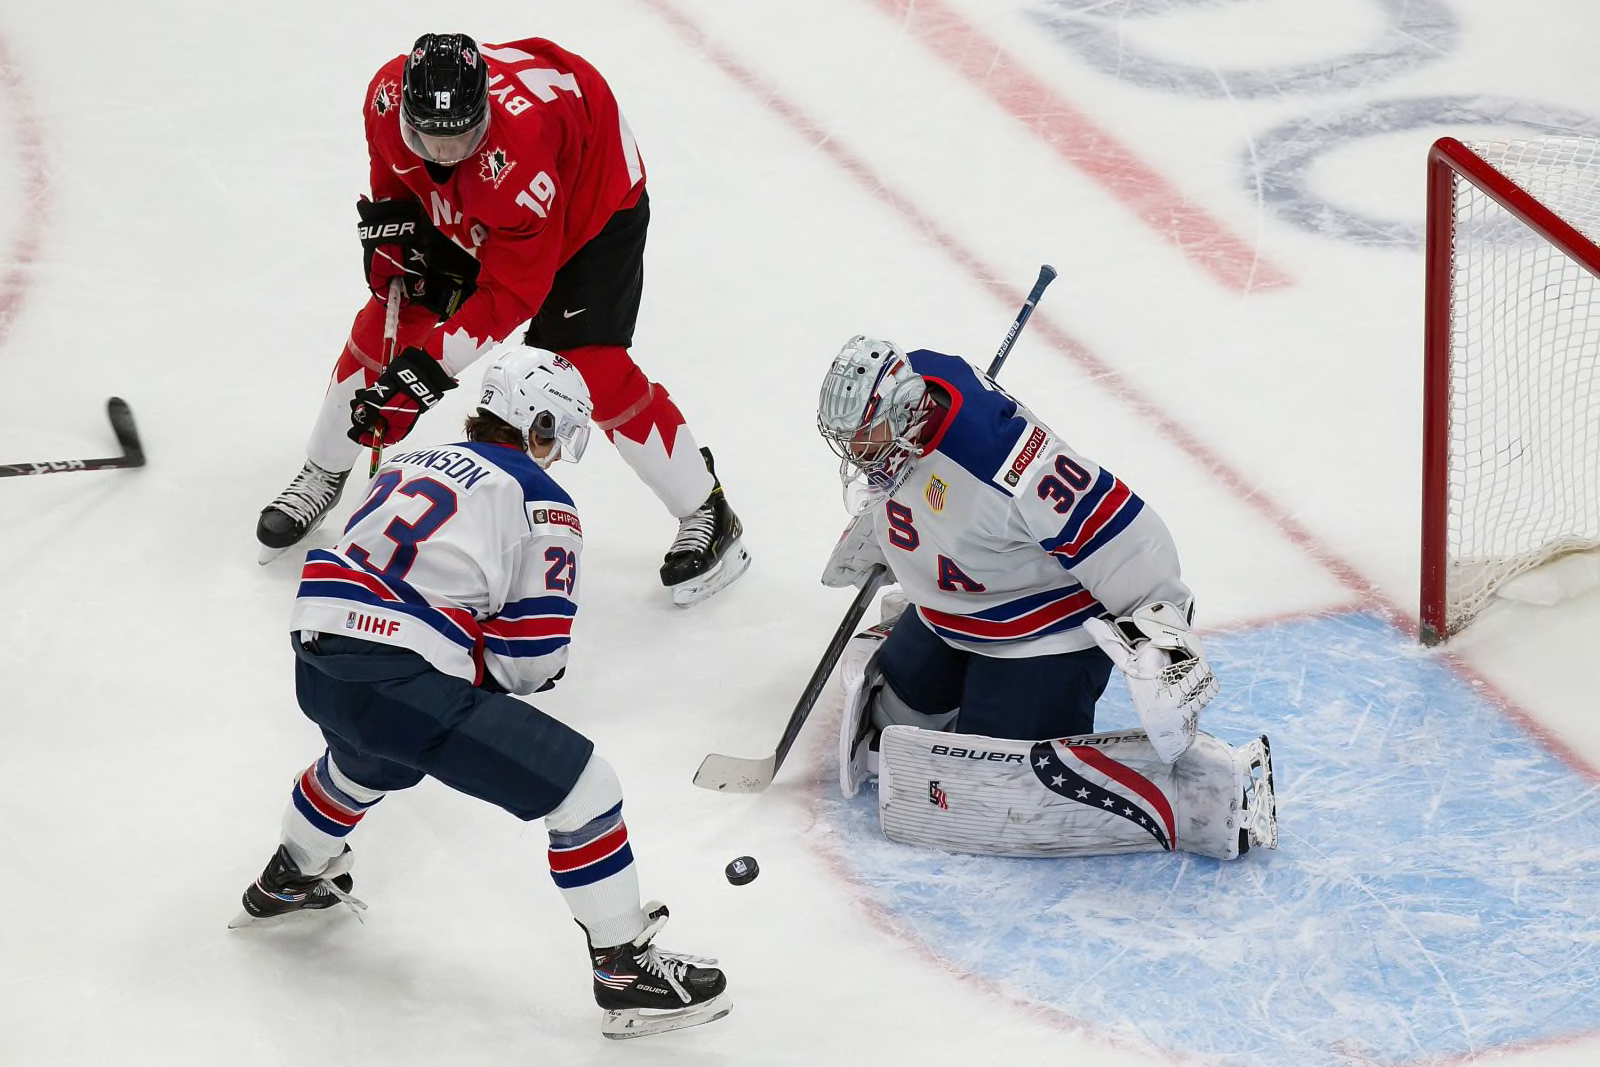 Three Stars from Day 10 of WJC: Knight, Zegras deliver gold to USA